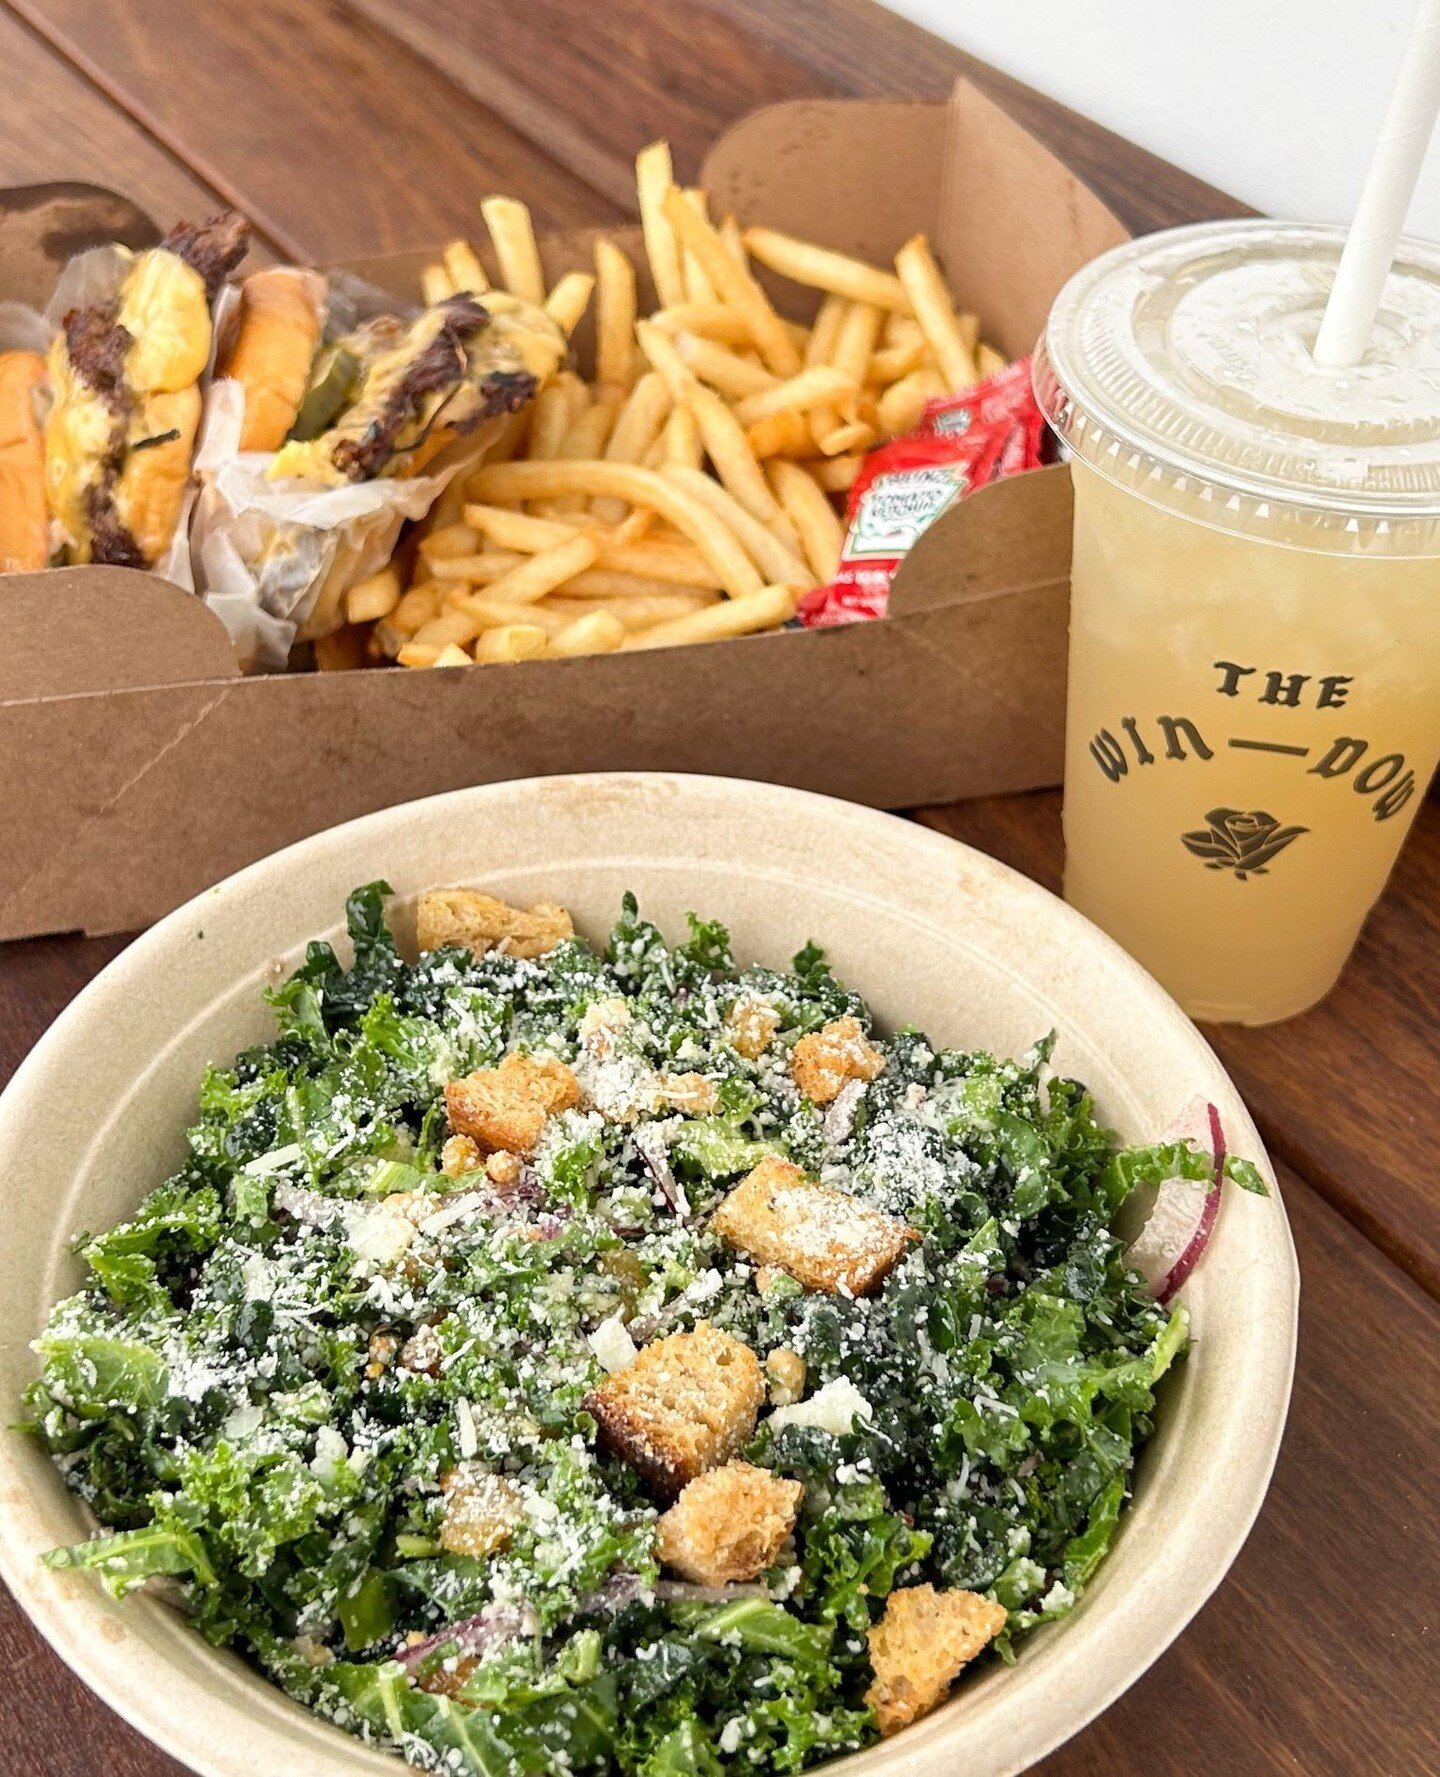 EXPERIENCE ~ the crunch of the kale salad🥗⁠
#TheWinDowLA